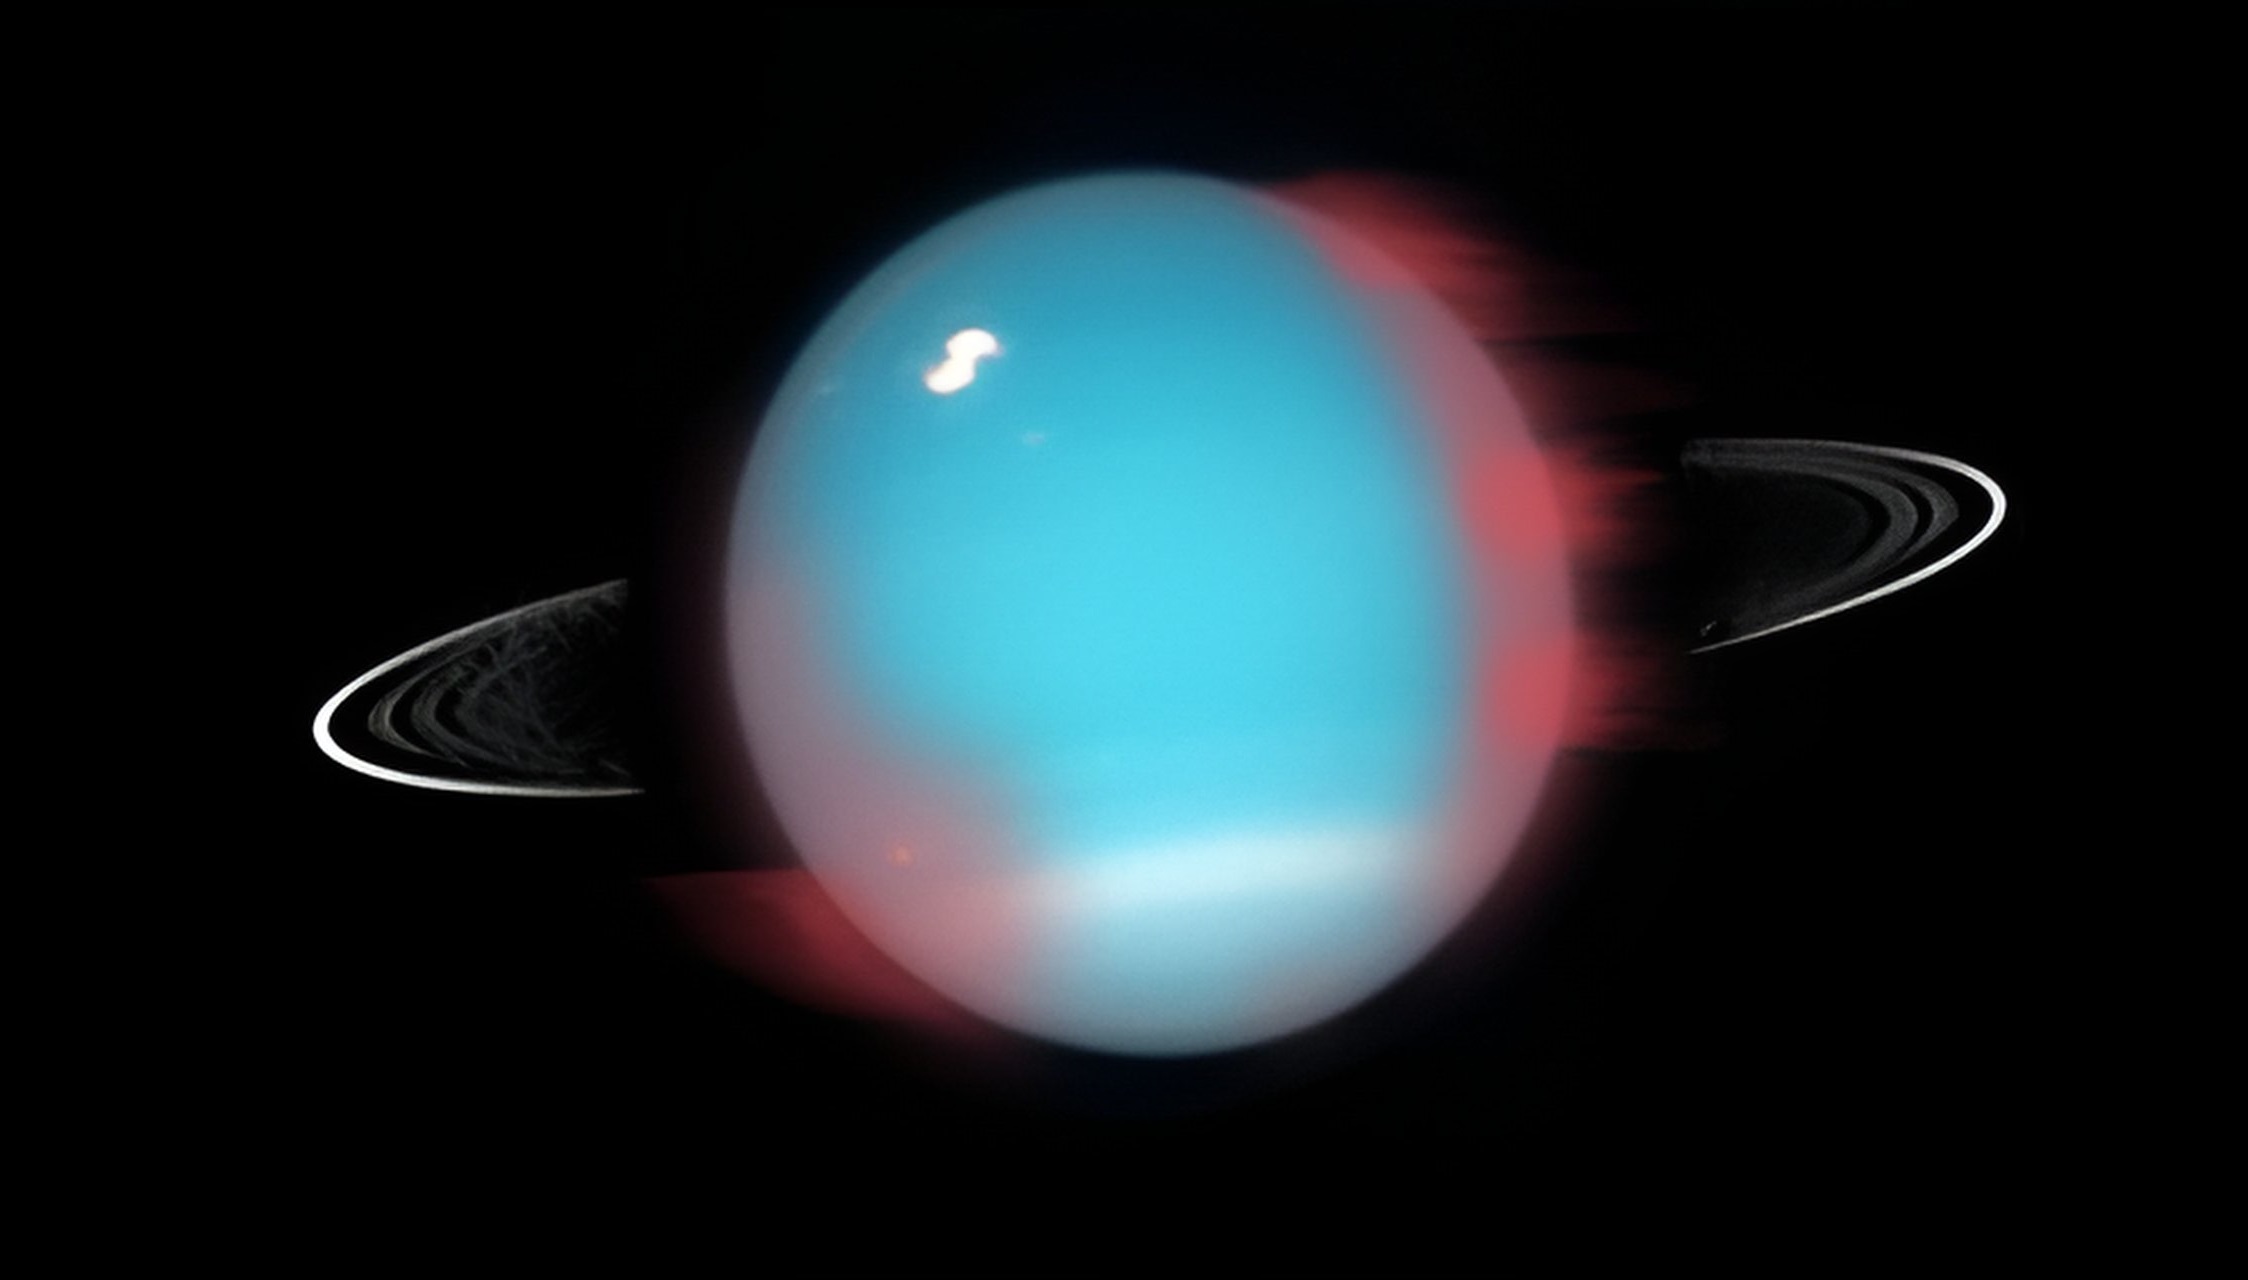 Auroras on Uranus tell about the possibility of life on the ice giants